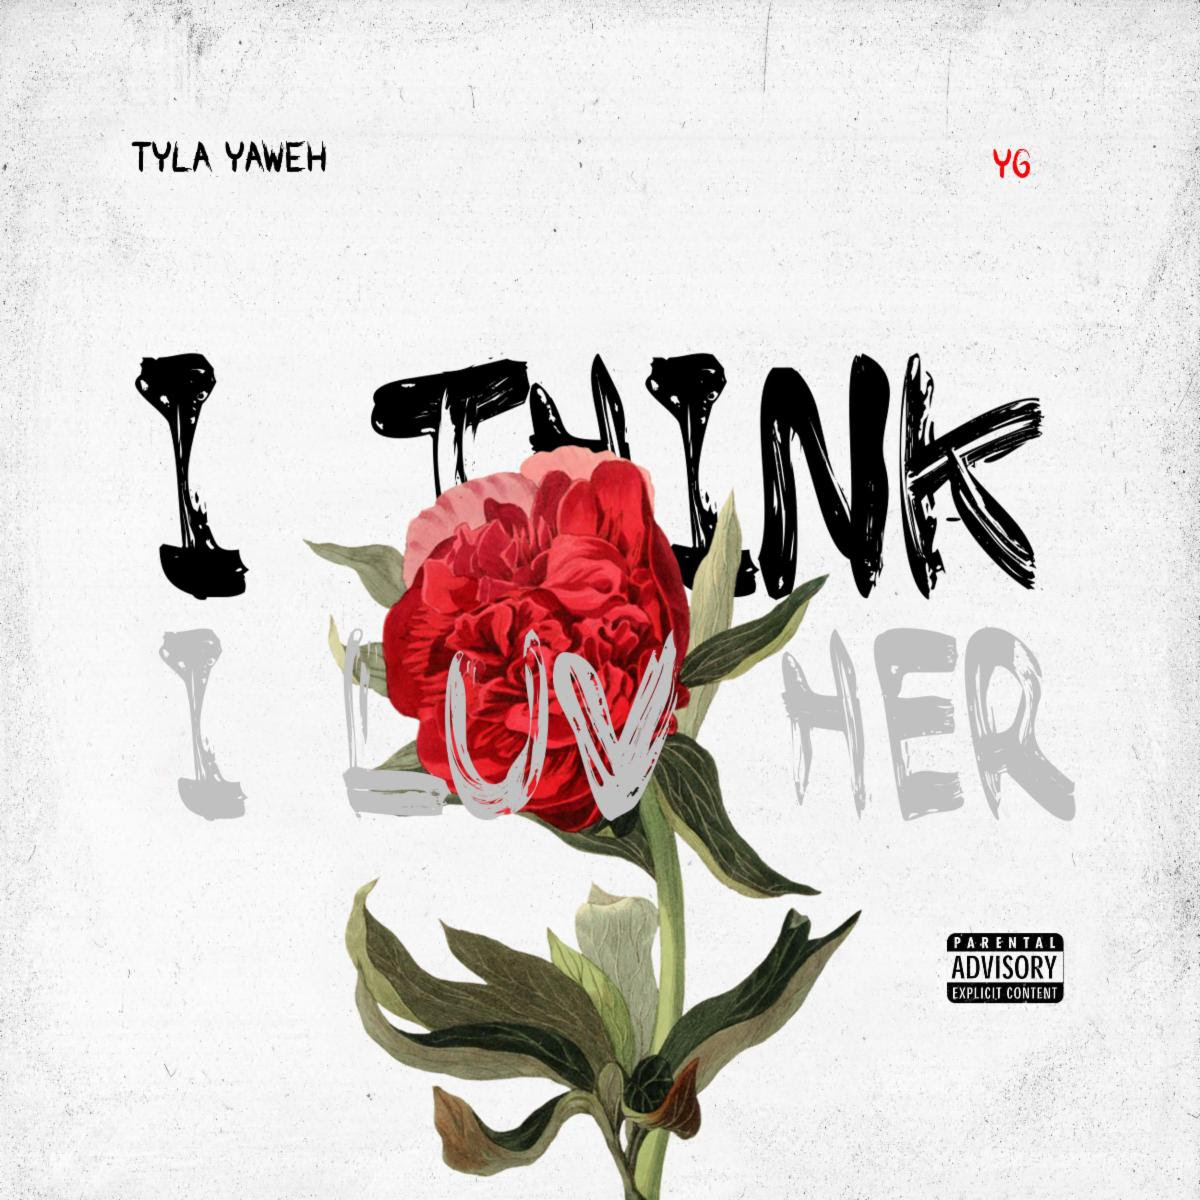 Tyla Yaweh Yg Collaborate For New Single I Think I Luv Her